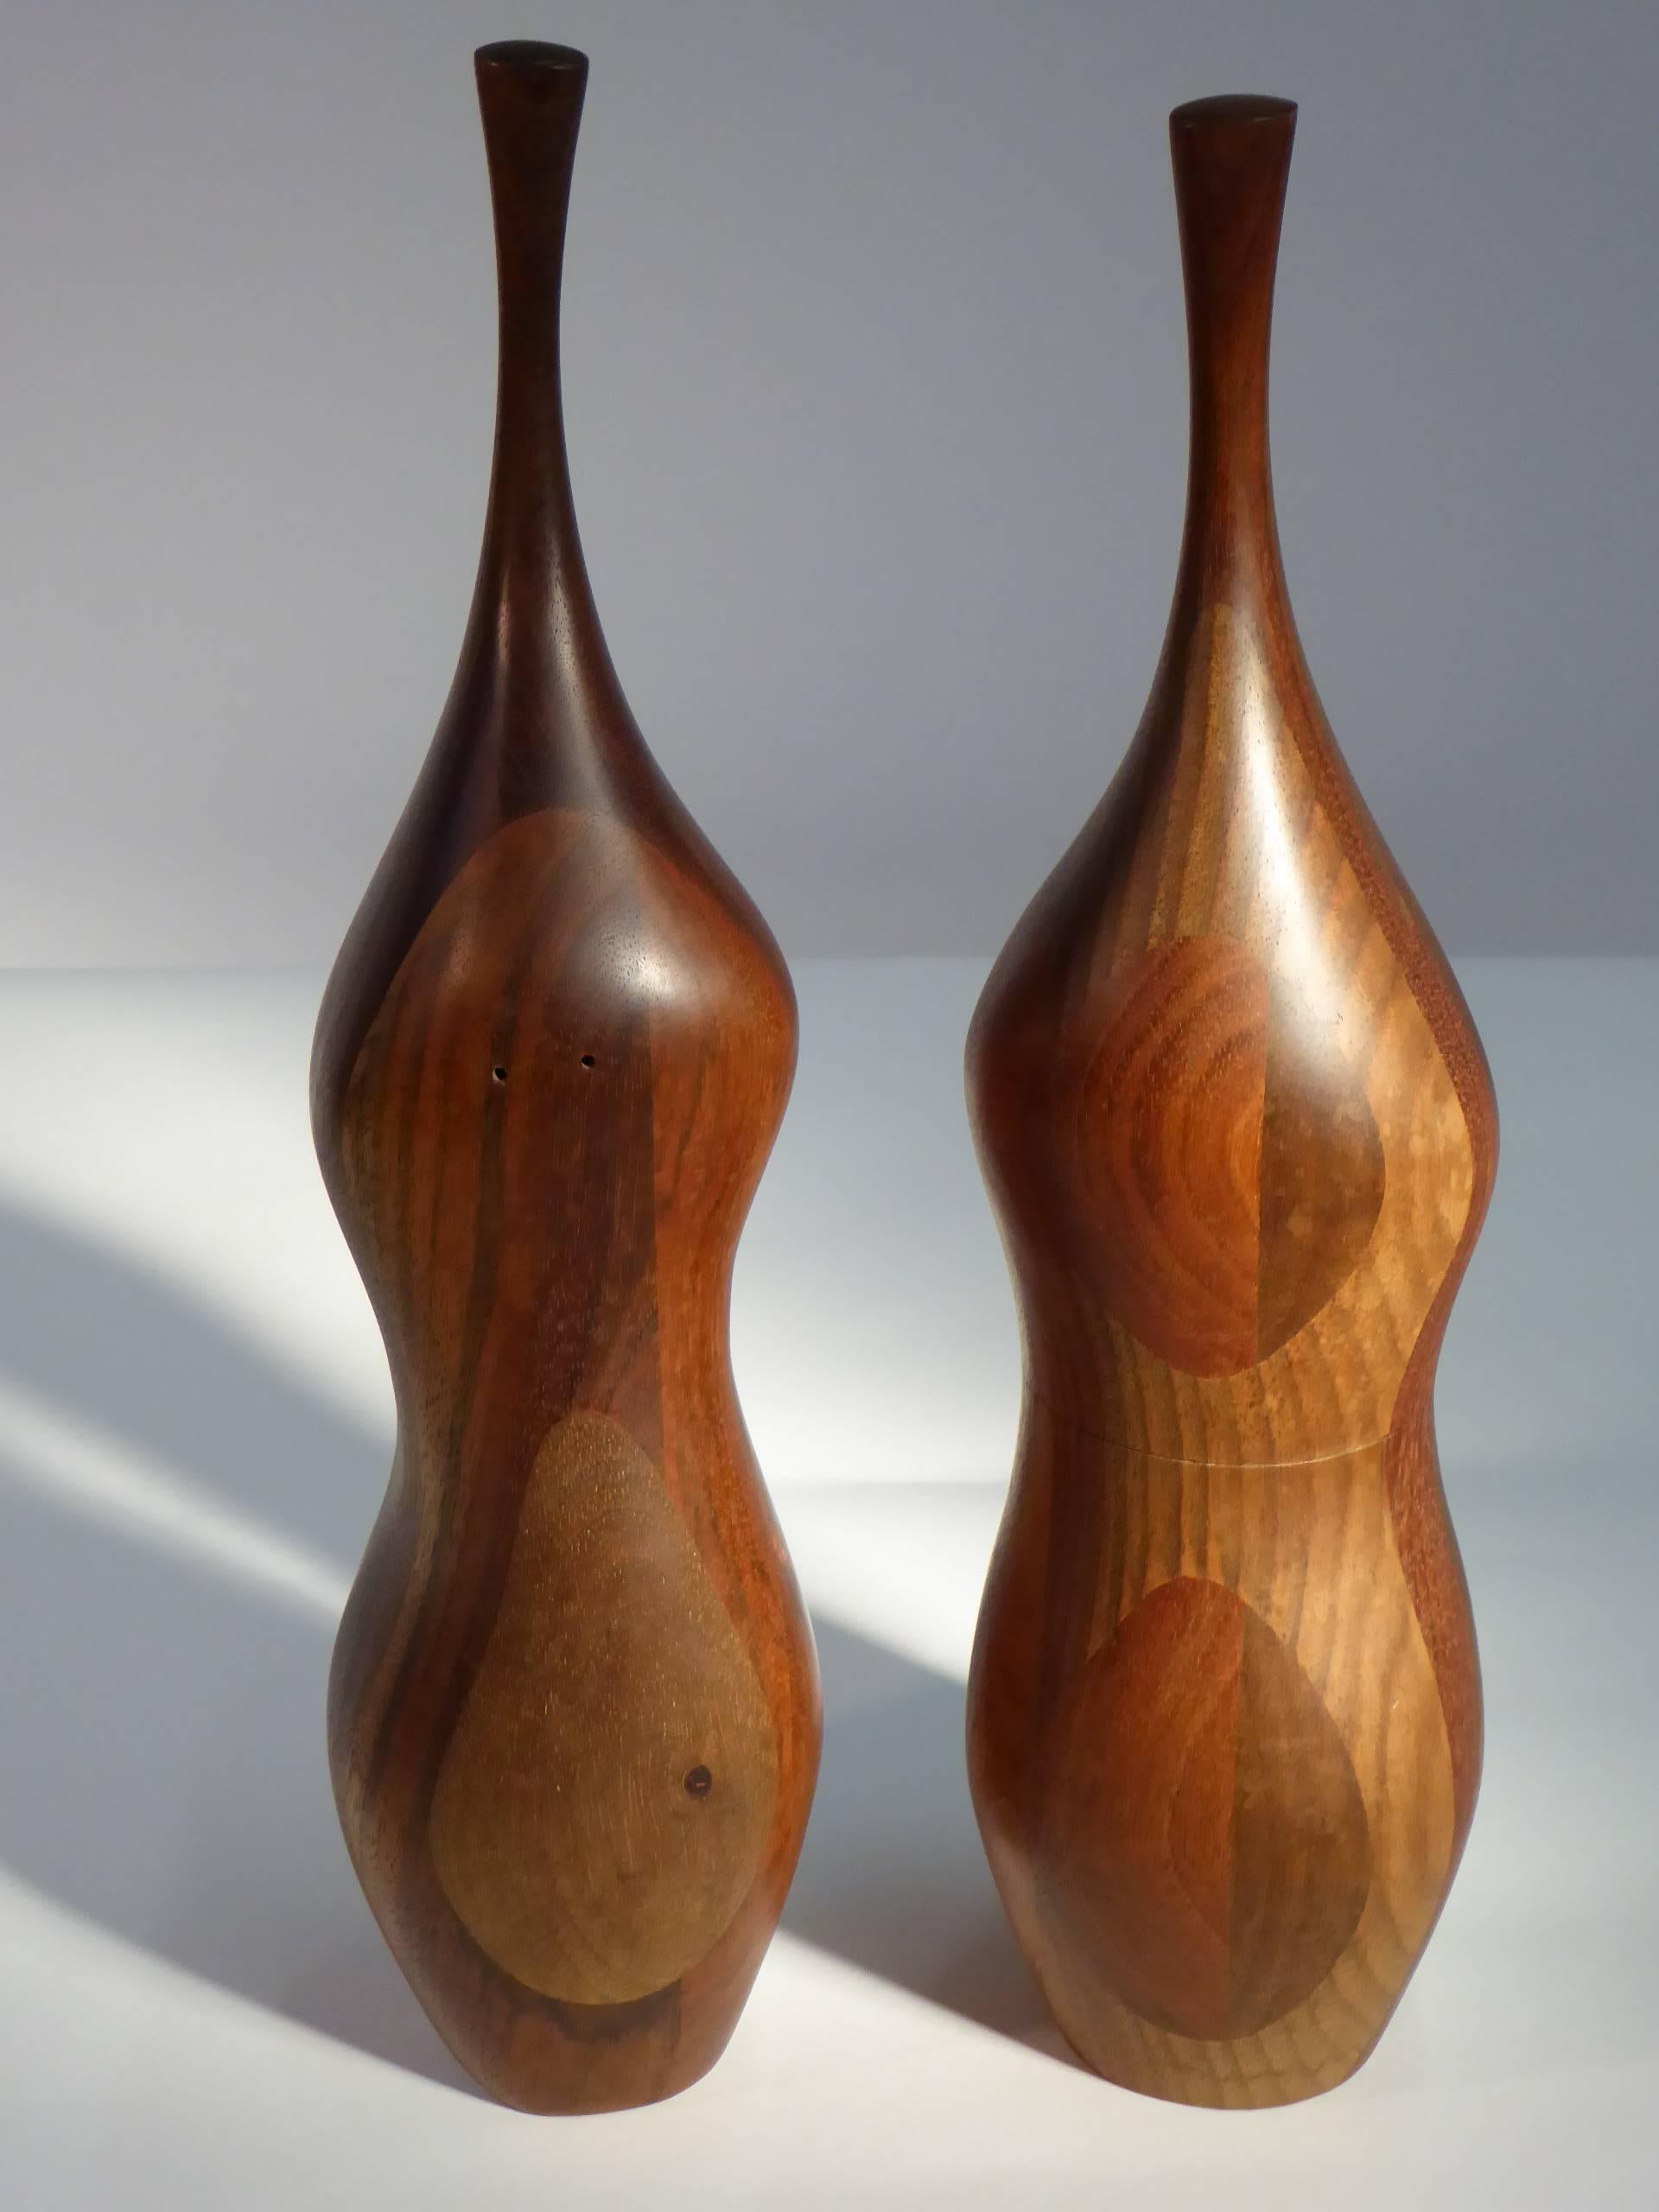 REDUCED FROM $2,250.
An outstanding 20th century oversized pair of Daniel Loomis Valenza designed pepper grinder and salt shaker. Sinuous and sexy, organic solid laminated walnut, beautifully crafted in the 1970s with staved heavily figured walnut.